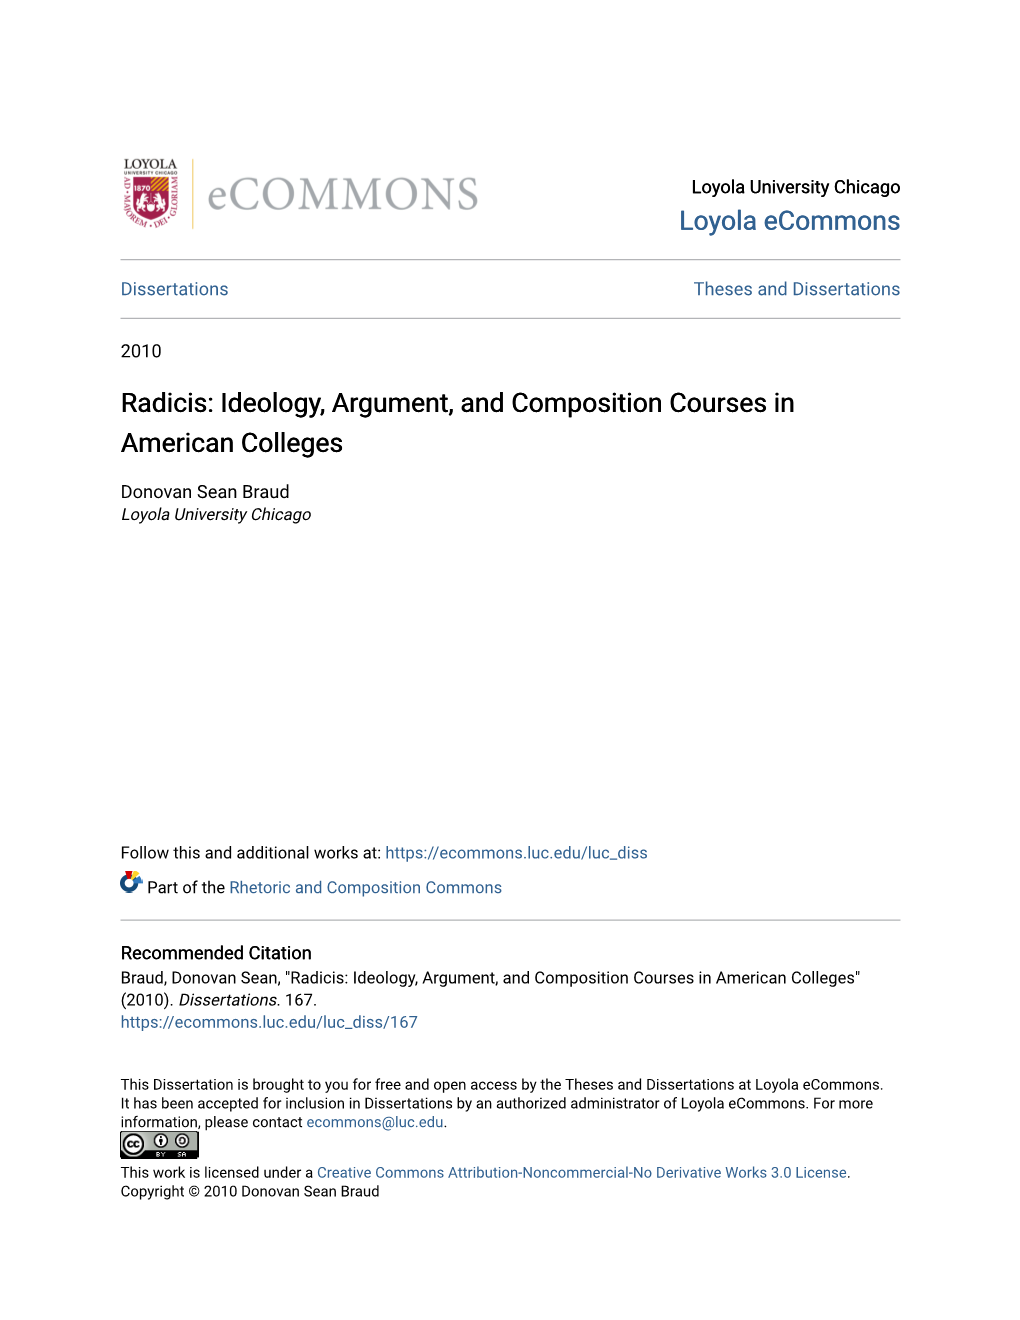 Ideology, Argument, and Composition Courses in American Colleges